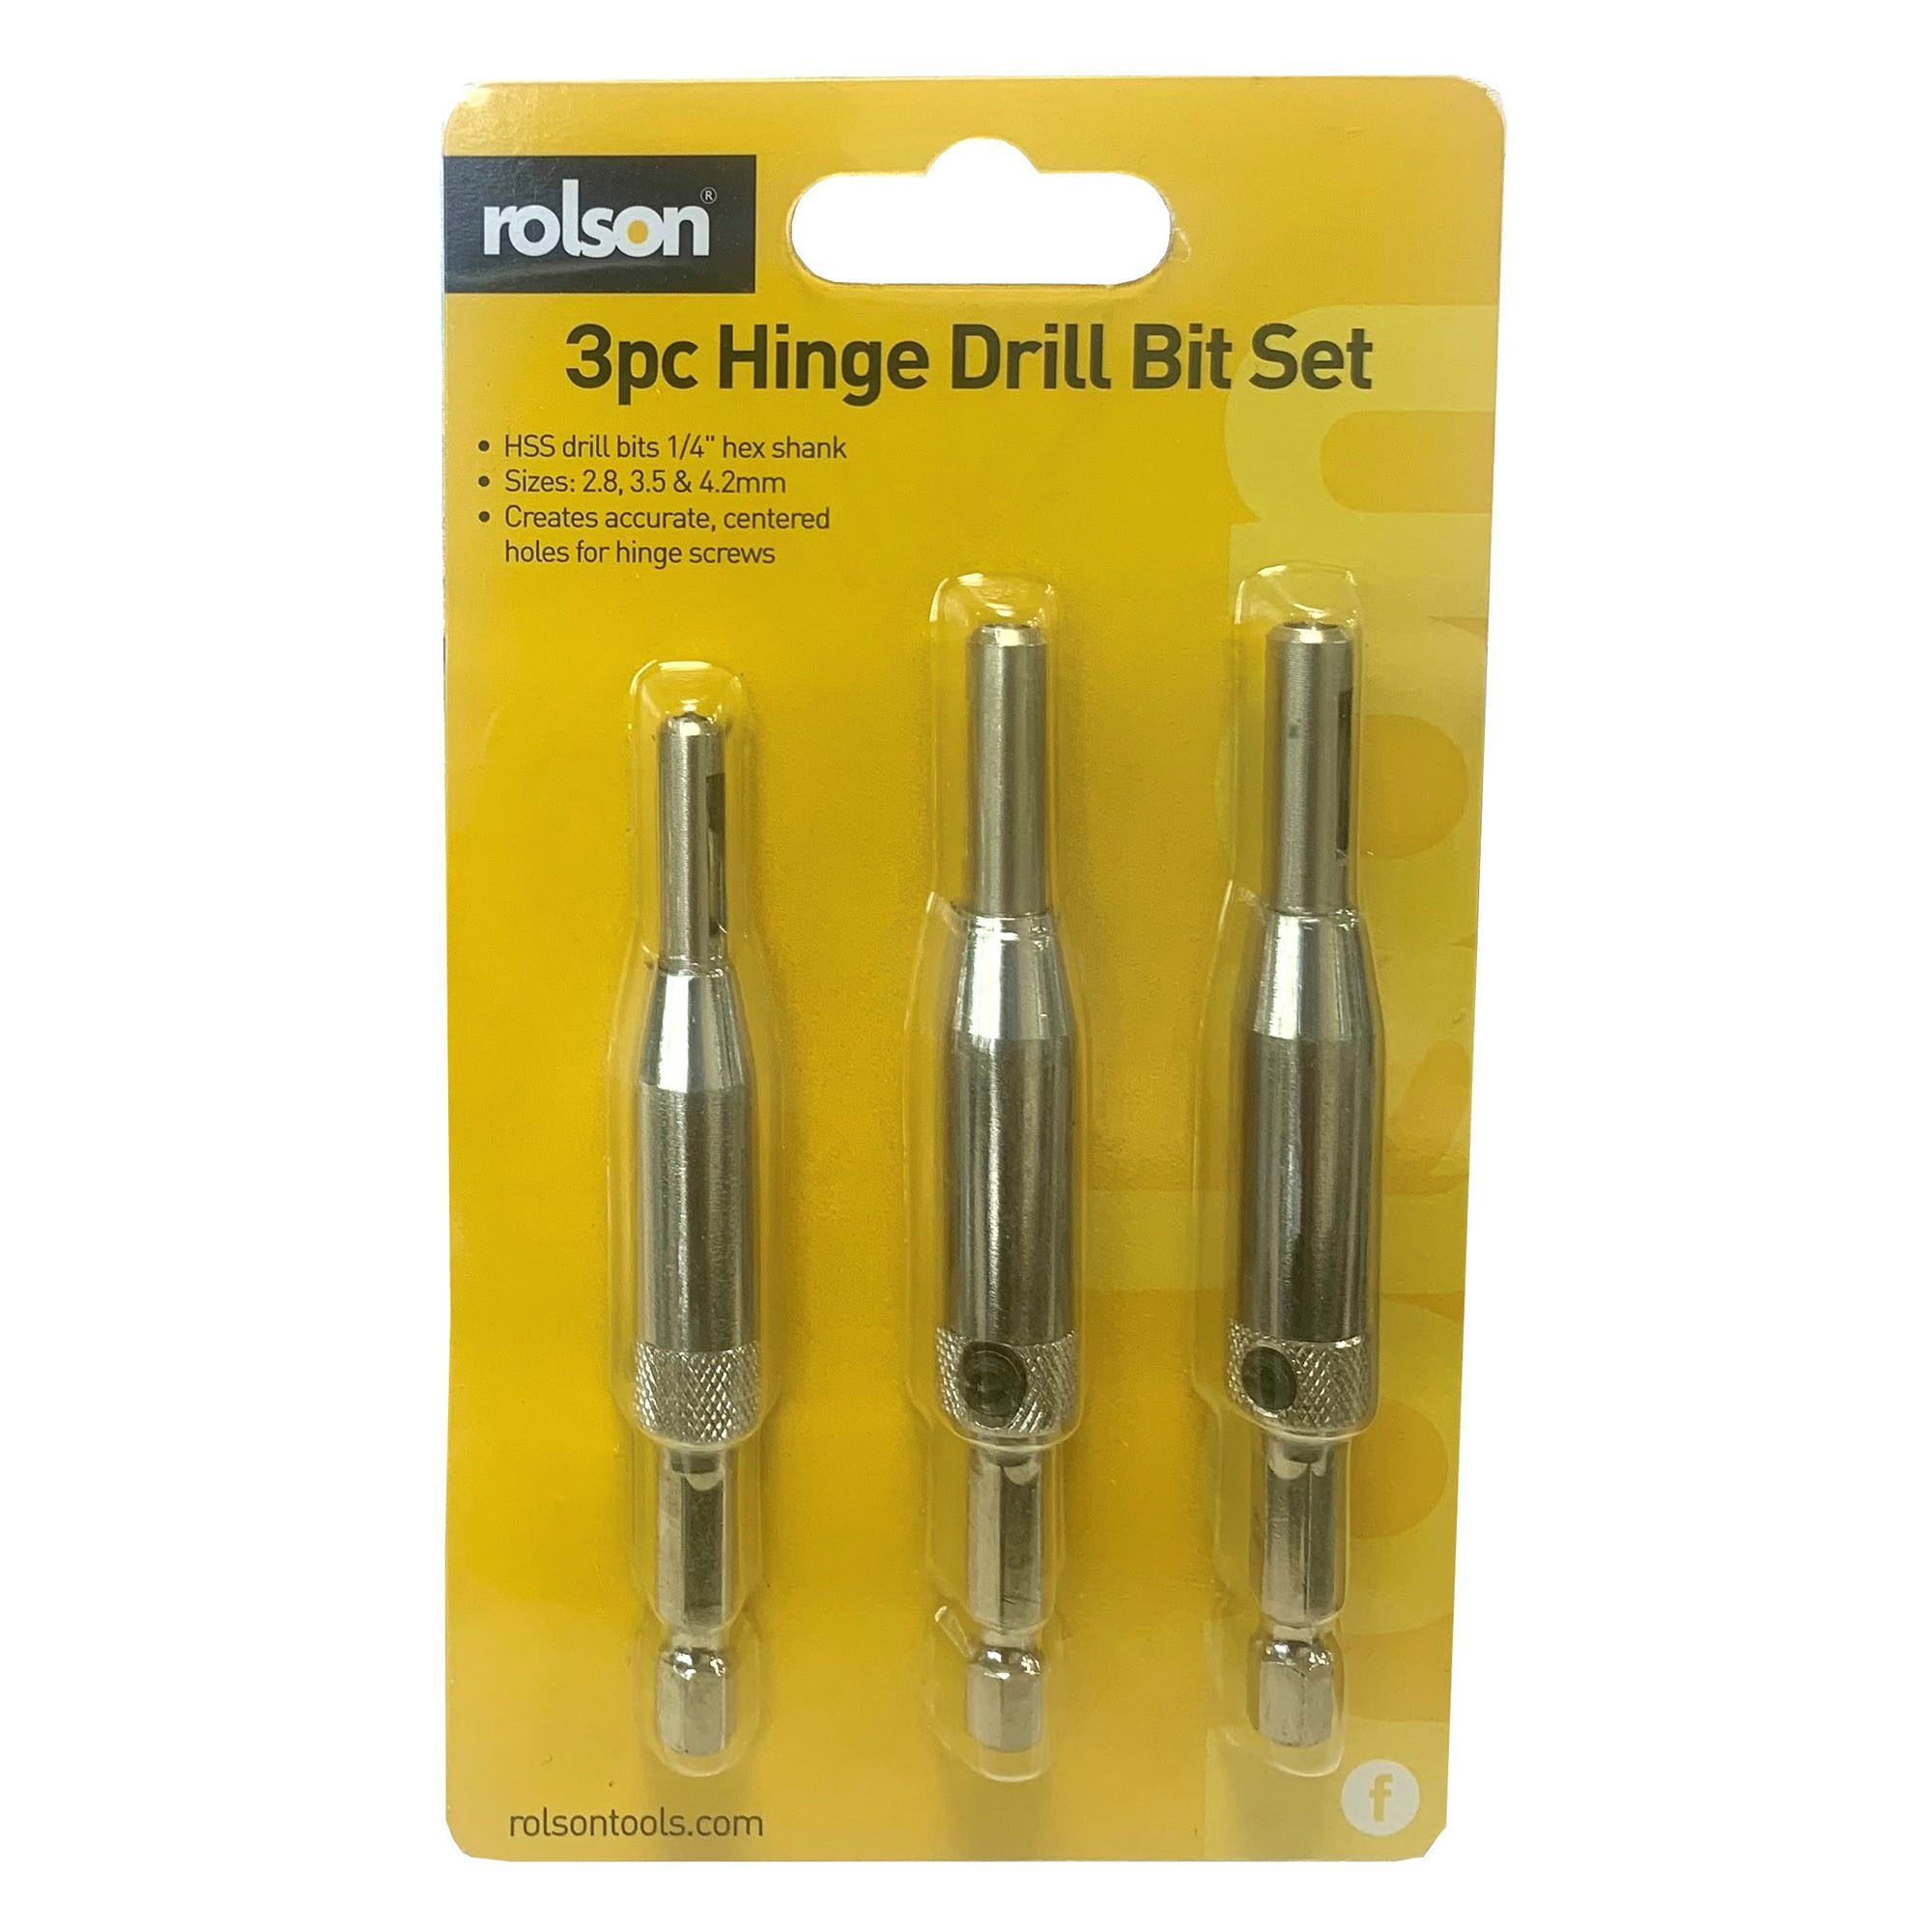 Self centering 3pce drill bit set (48576) - ideal for hinges - Rolson Tools